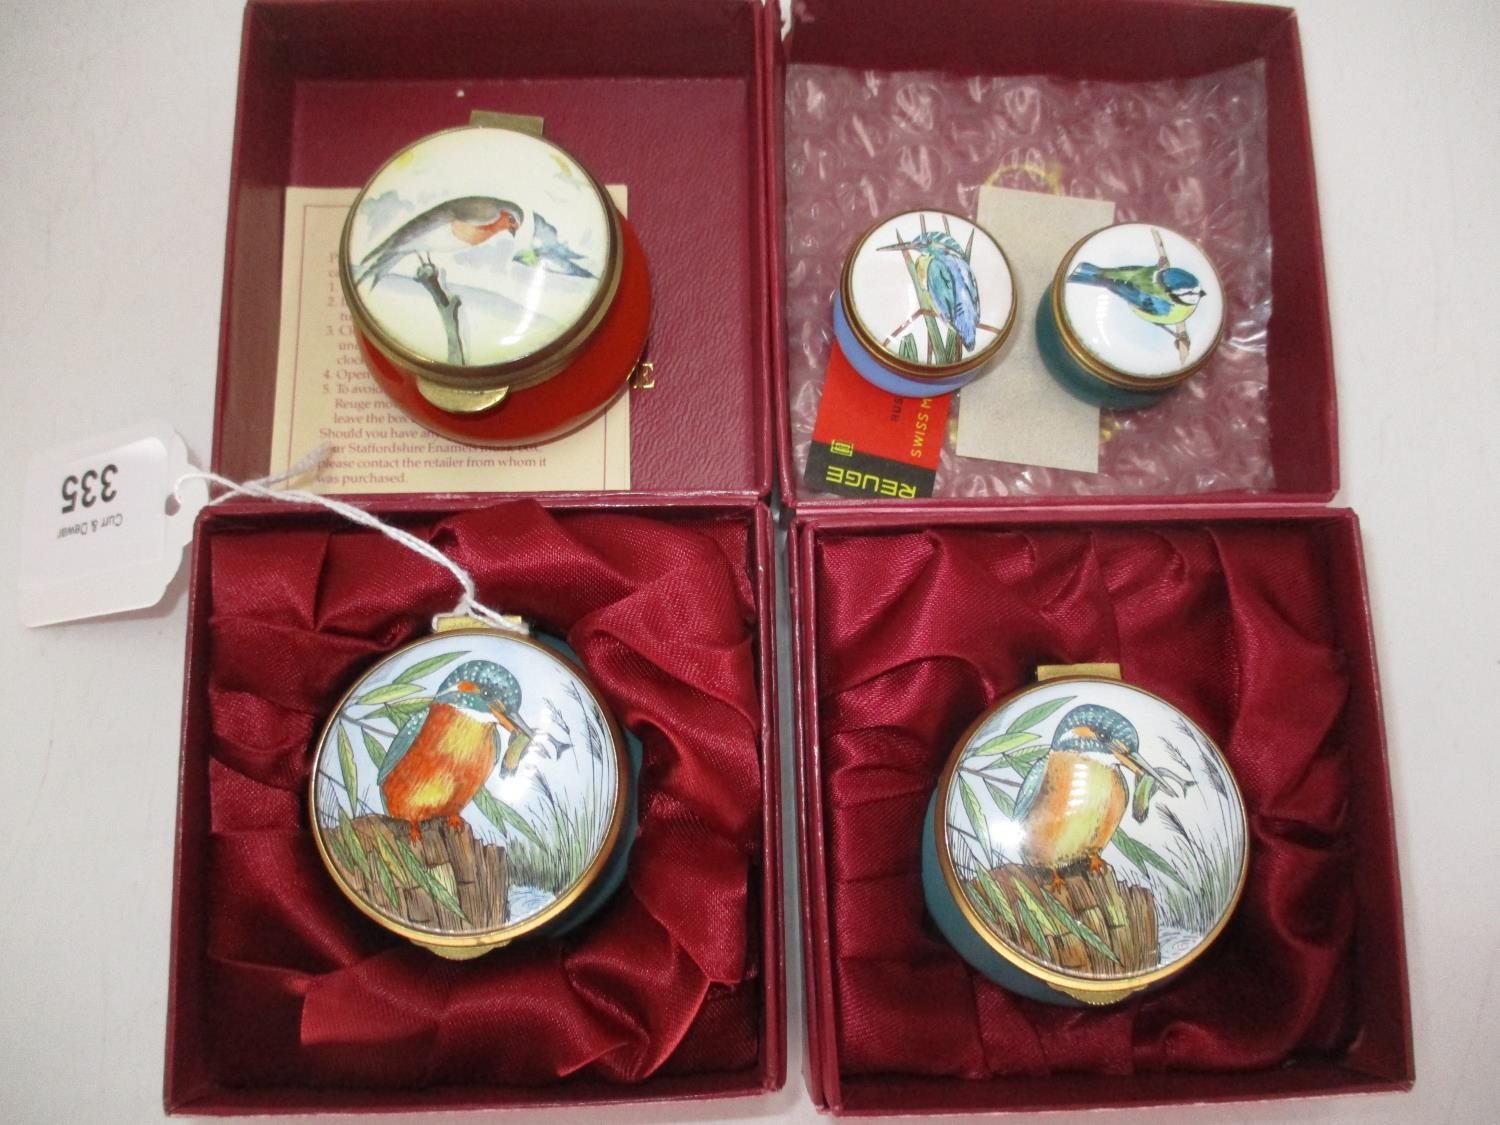 Two Staffordshire Enamel Boxes No. 174 and 325 of 750, 2 Birmingham Enamel Boxes and Another